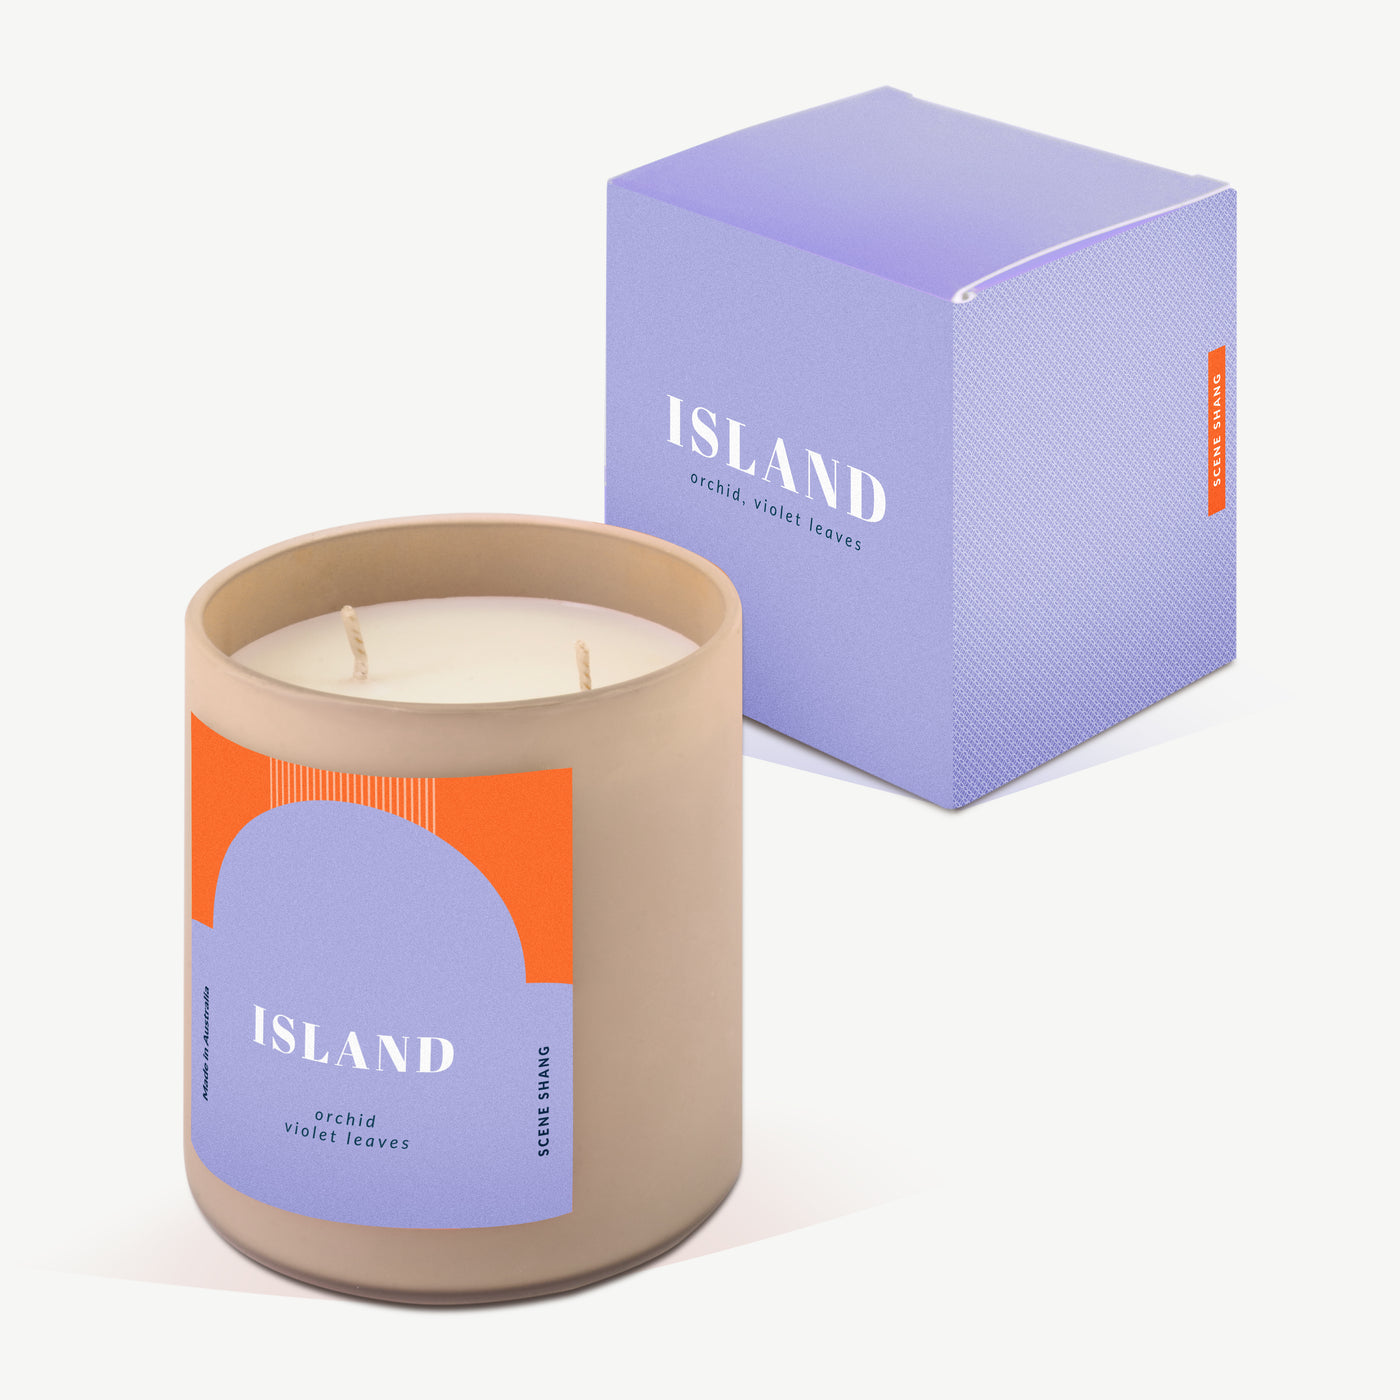 ISLAND Triple Scented Soy Wax Candle (Orchid, Violet Leaves)